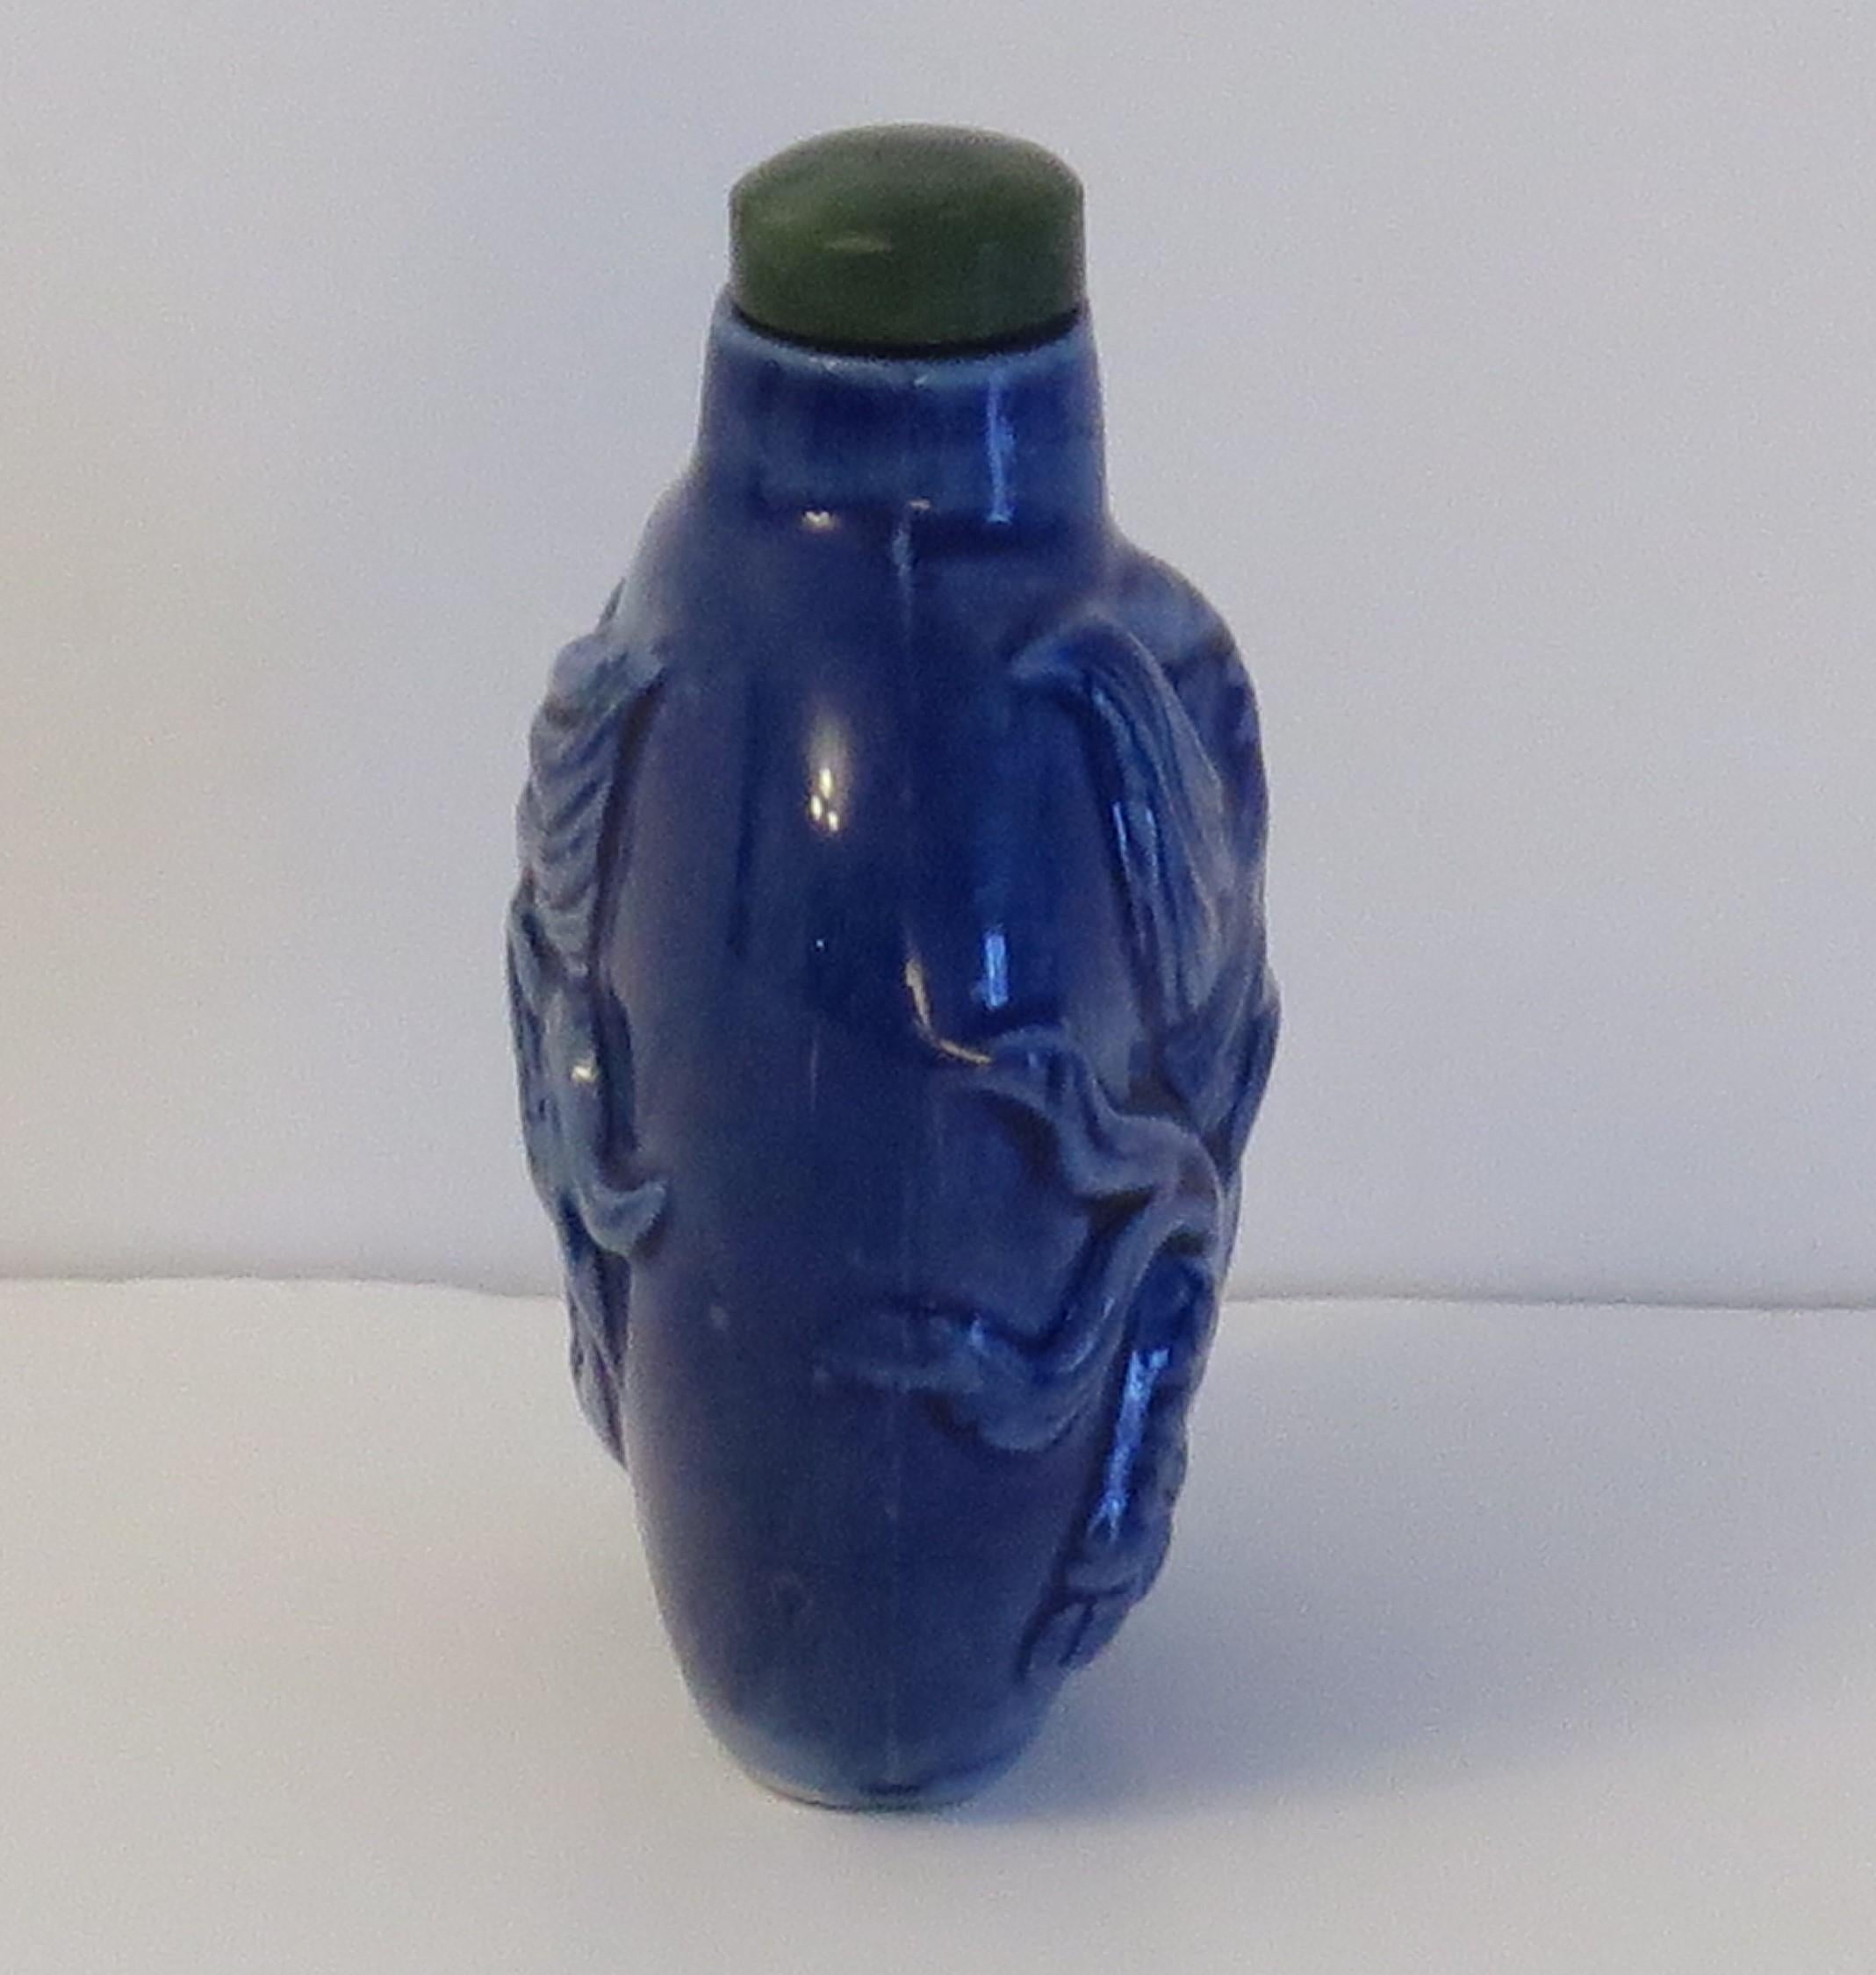 Chinese Export Chinese Porcelain Snuff Bottle moulded dragon stone top with spoon, Circa 1930s